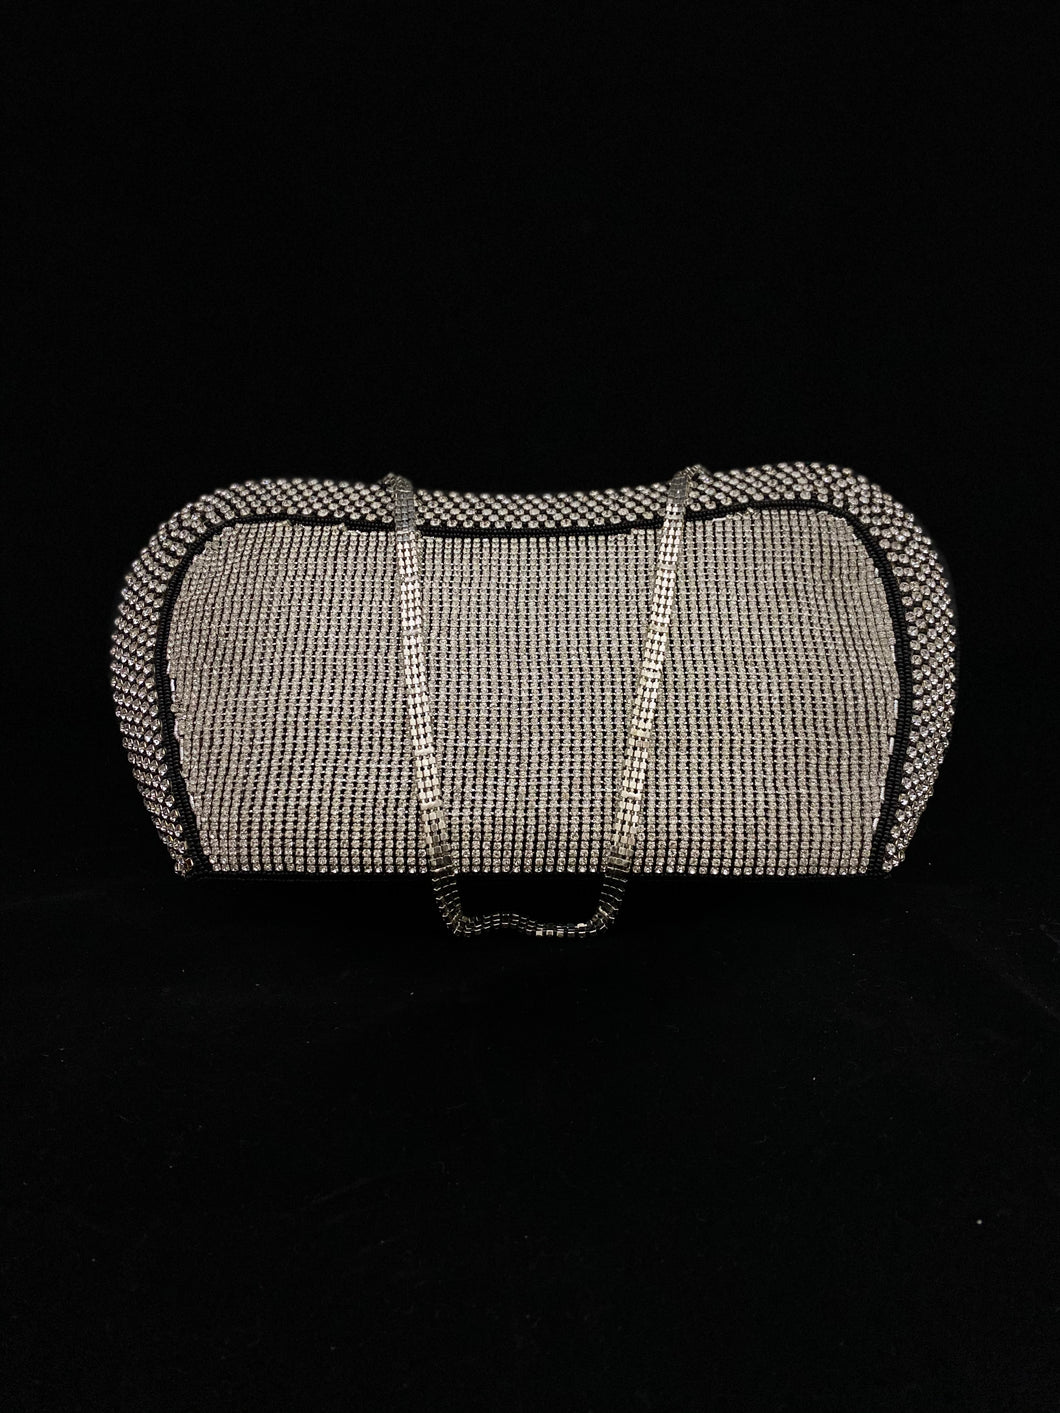 Evening Clutches(Purse) Black Beads, Silver Stones, with Unique Shape